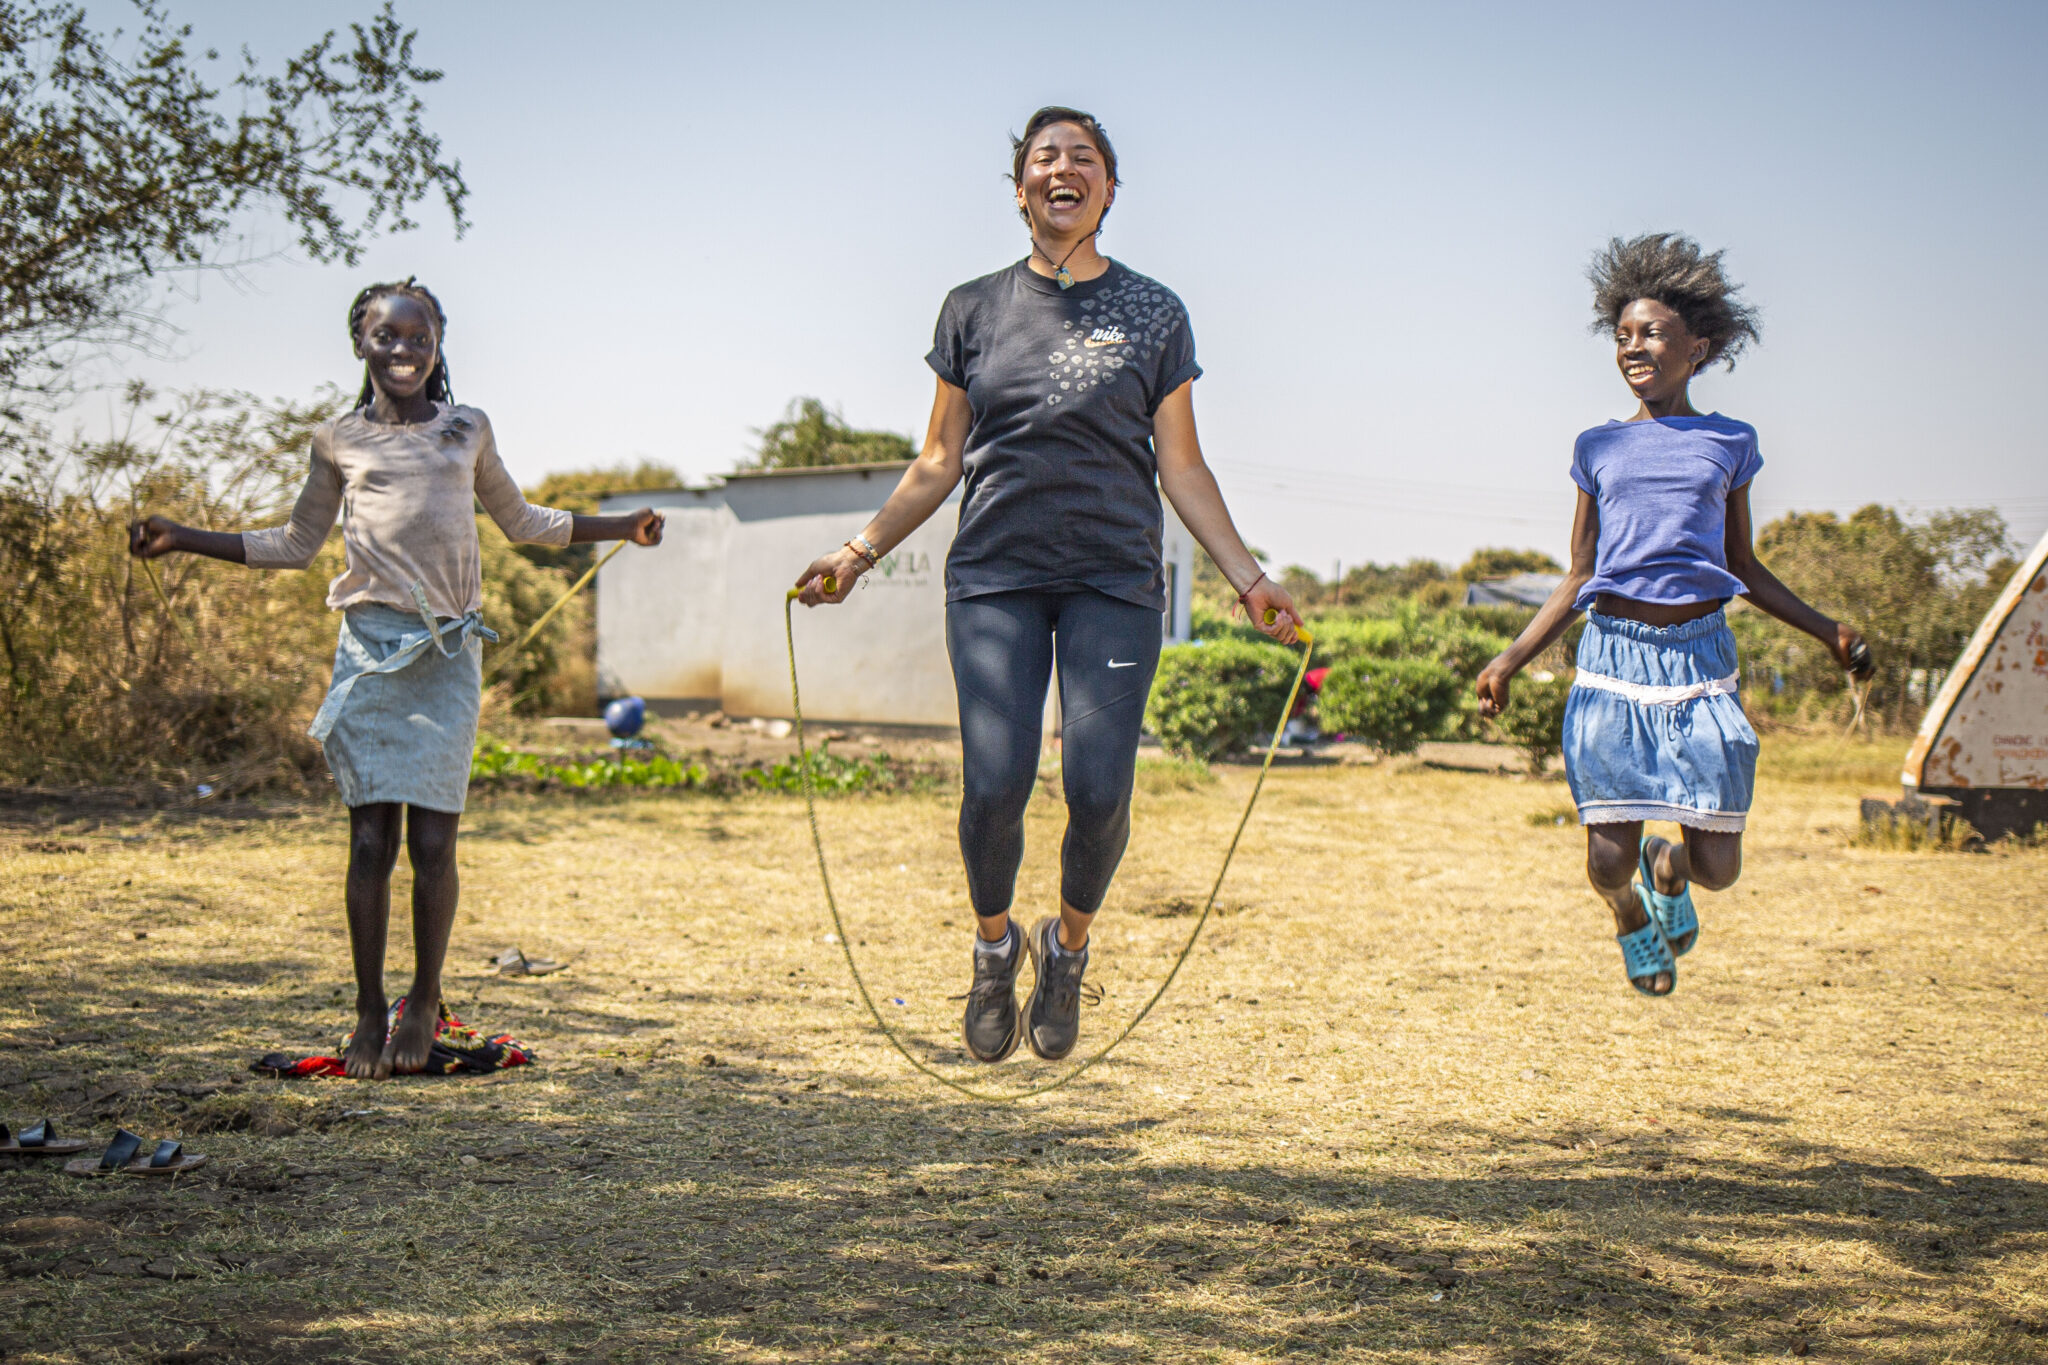 A foreign woman volunteer and two local young girls joyfully jumping rope together